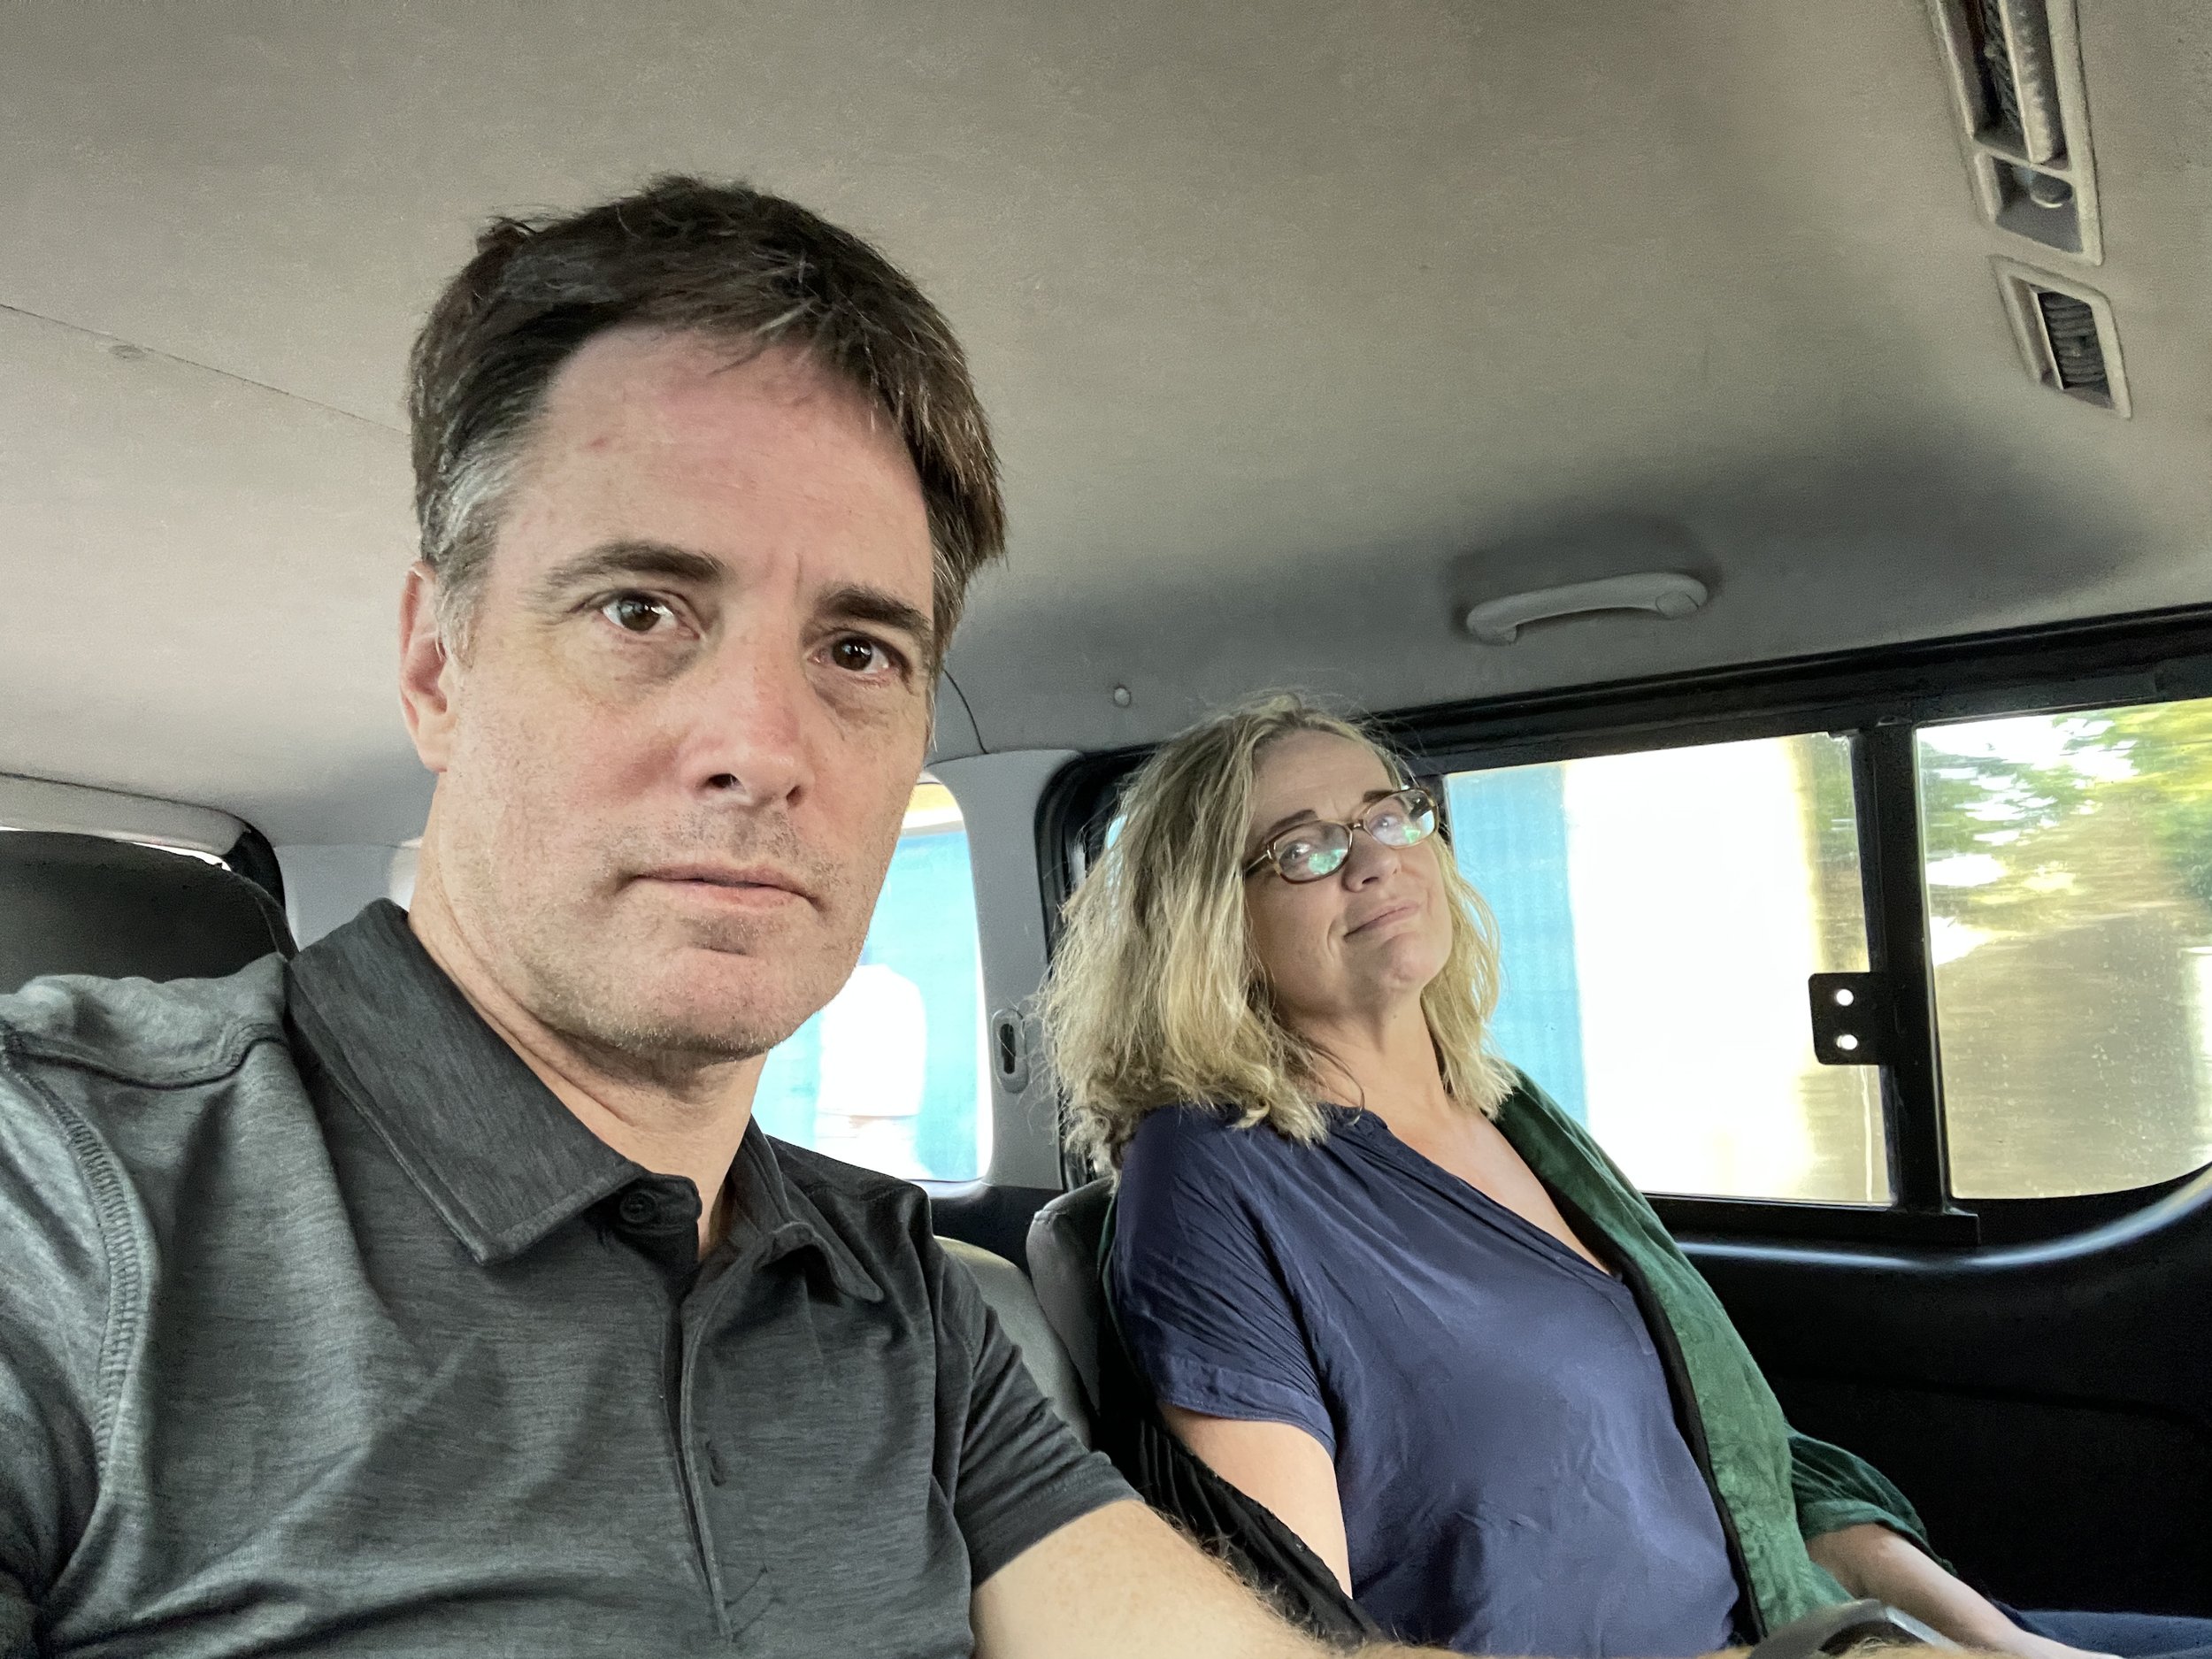 Rosie Waller and me on the way to CRS office in Dhaka for a Security Briefing.